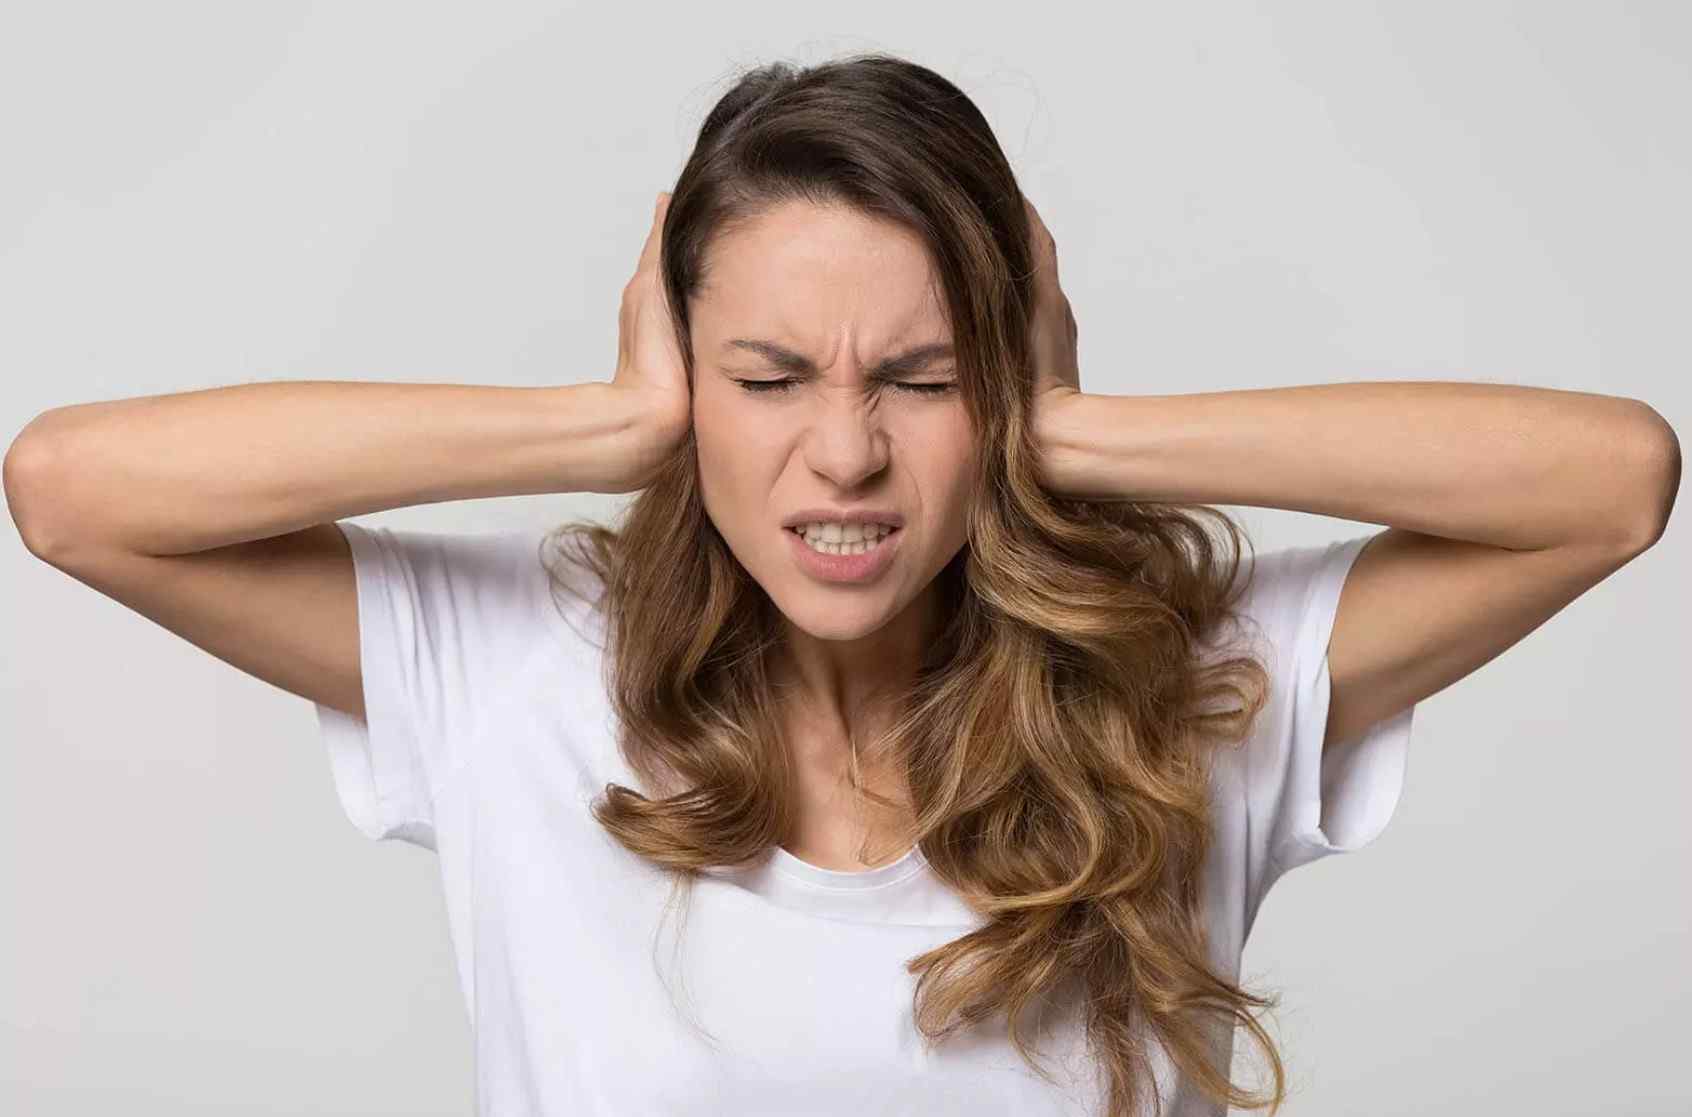 Extended exposure to loud noise, or damage to small hair cells in the inner ear, causes Tinnitus.